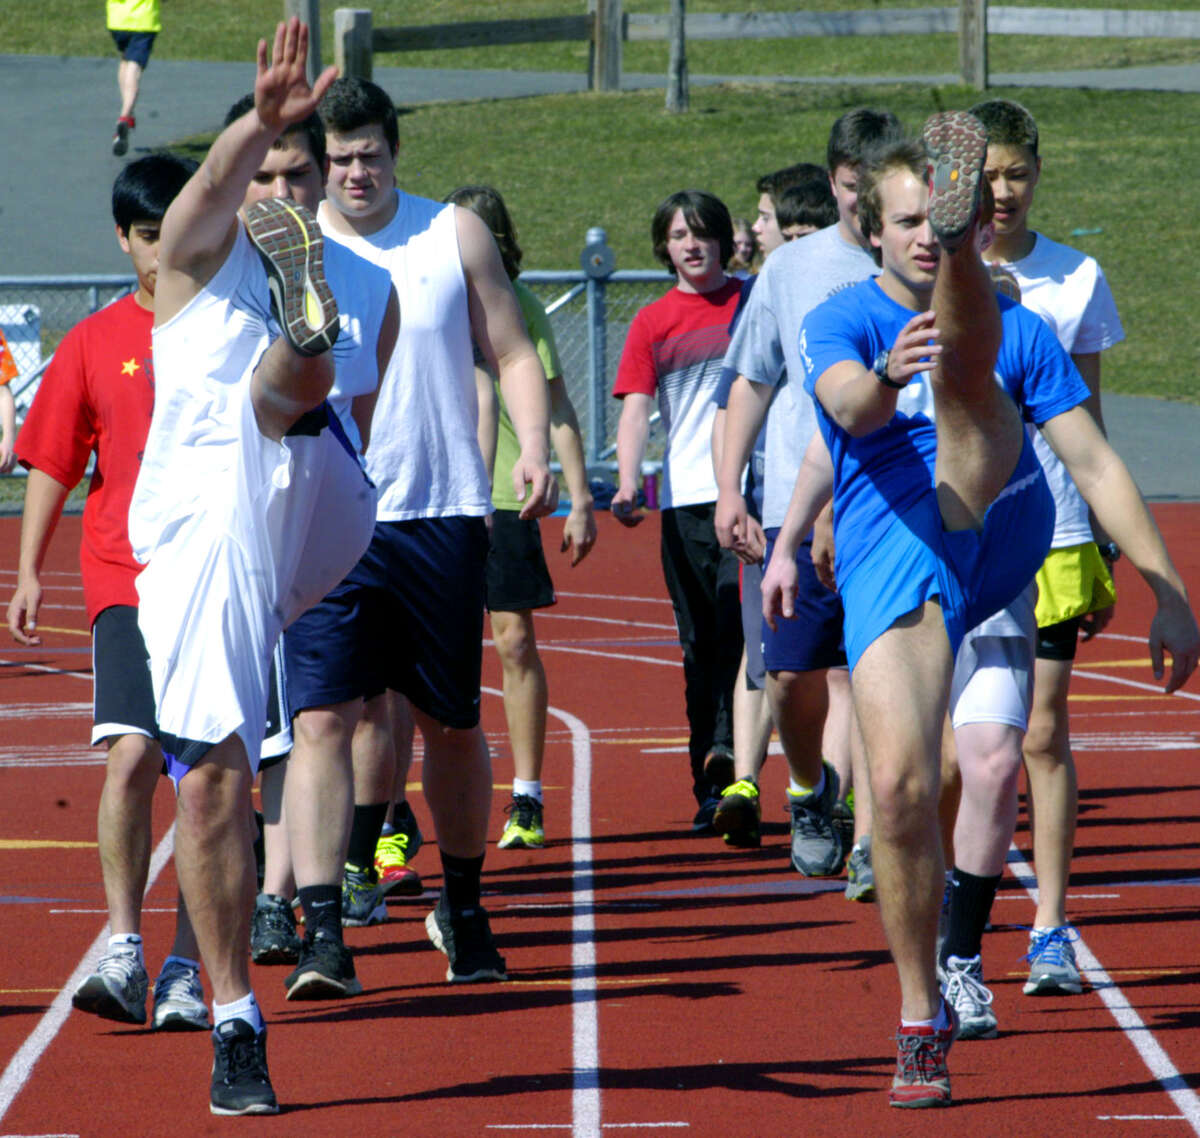 Lucas Guliano, left, and Ben Steers lead the Spartans through pre-season preparations for the Shepaug Valley HIgh School boys' track campaign, April 2013